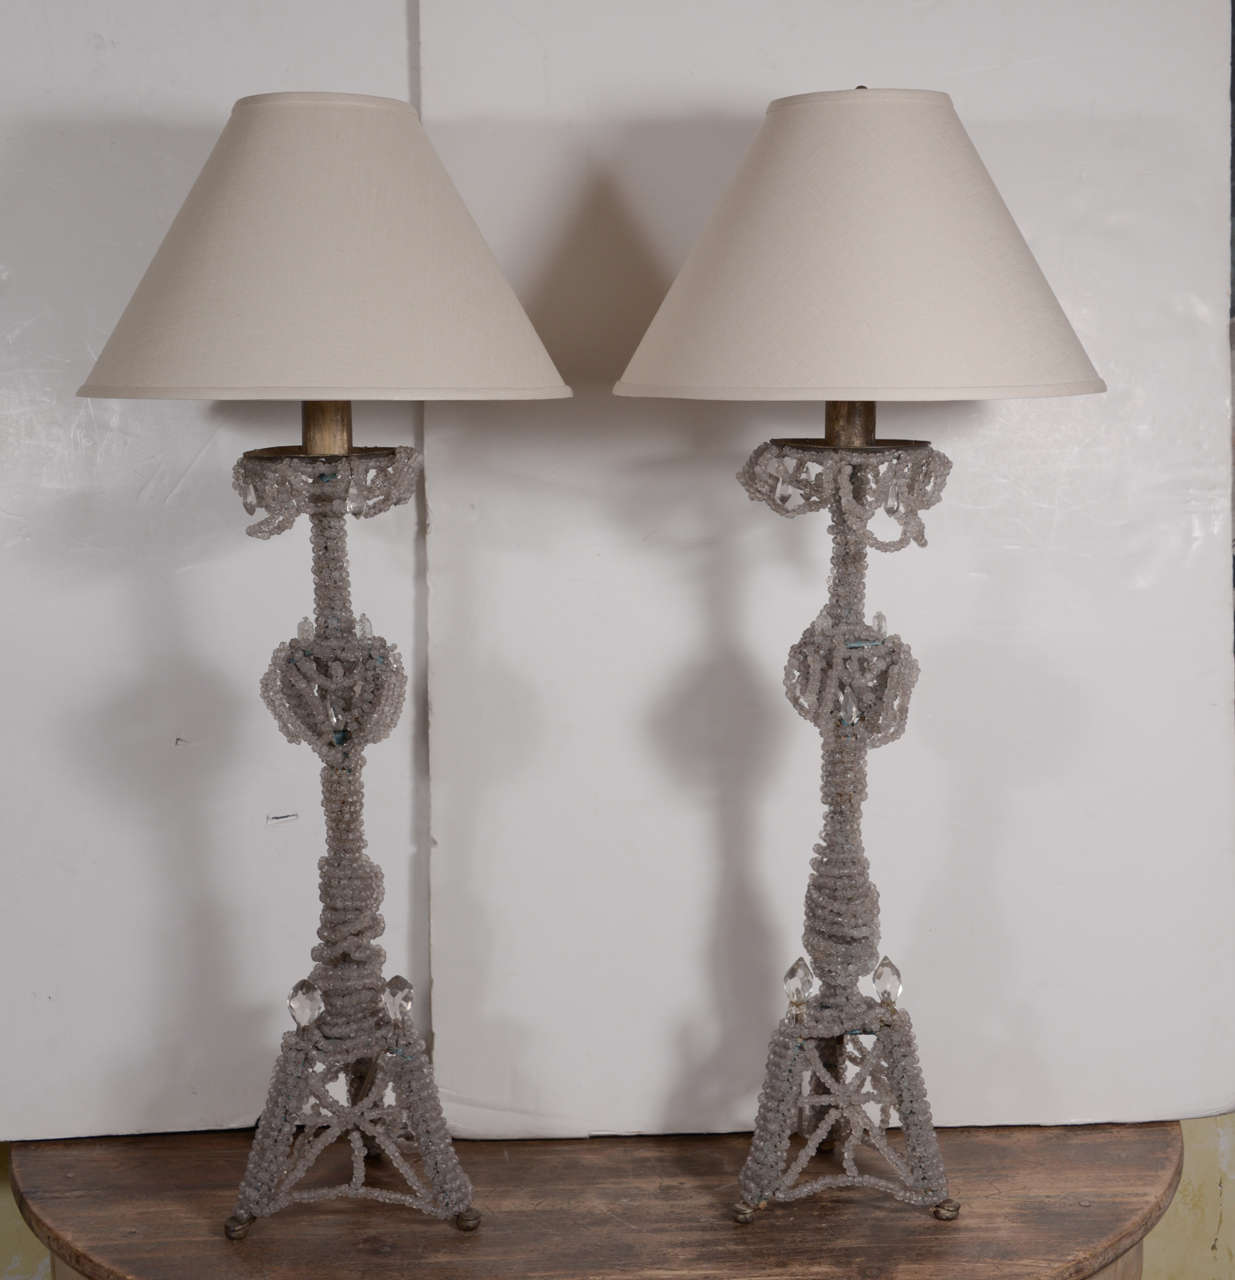 Fabulous Pair 1940's Italian beaded lamps. Wired for the US. Will split the pair. Shades sold separately.